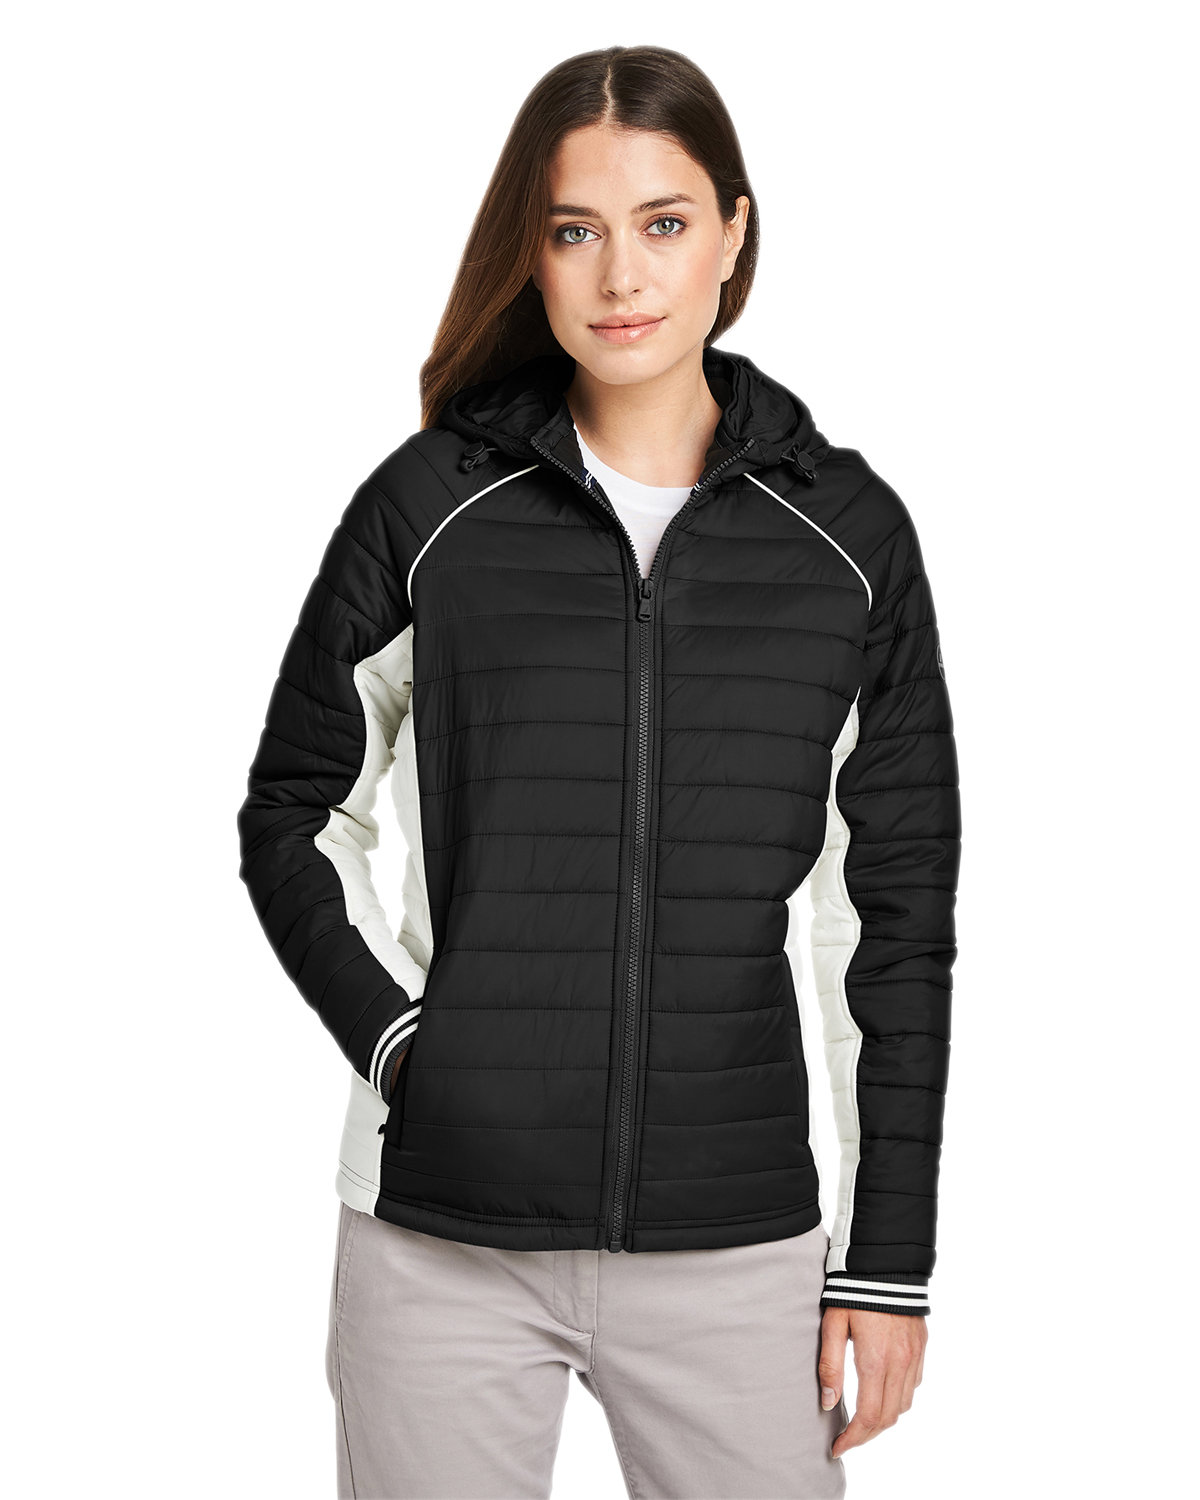 Nautica Ladies' Nautical Mile Puffer Packable Jacket | alphabroder